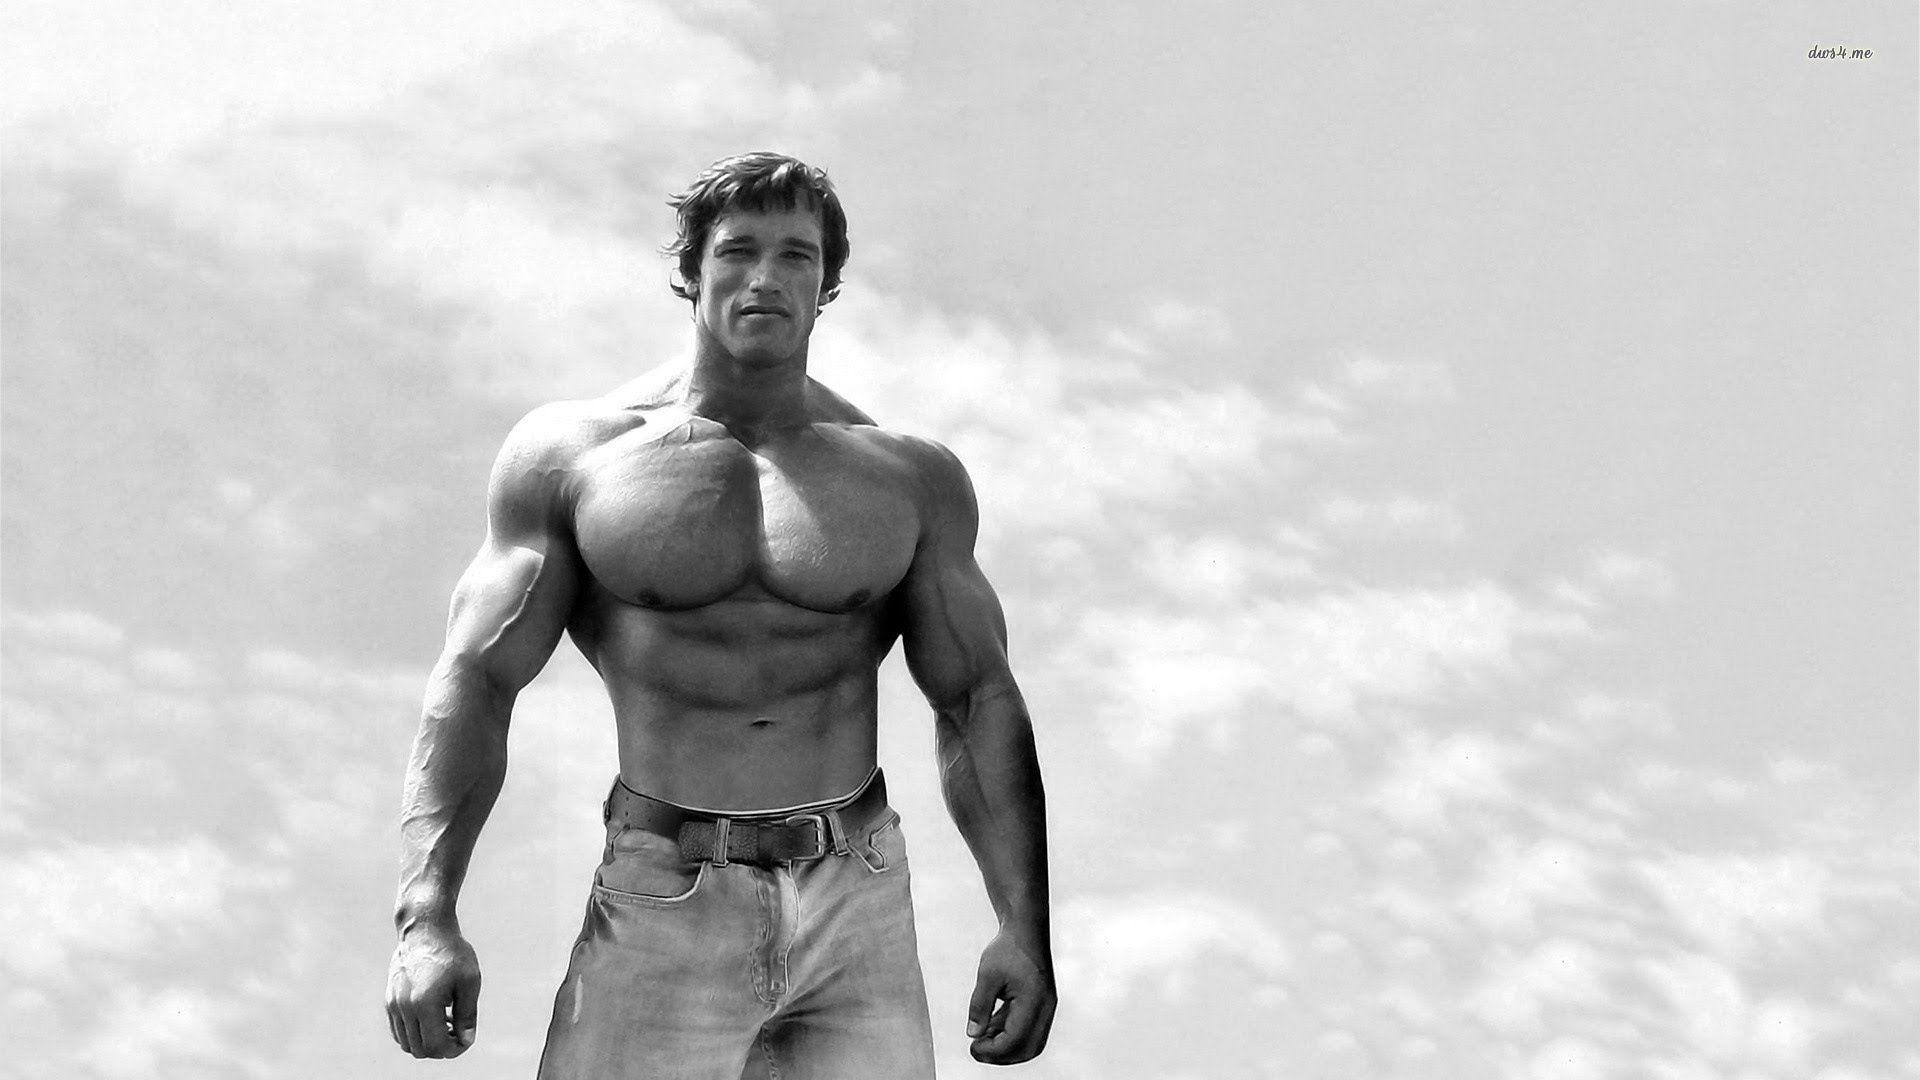 Arnold Schwarzenegger Is Just A Number!